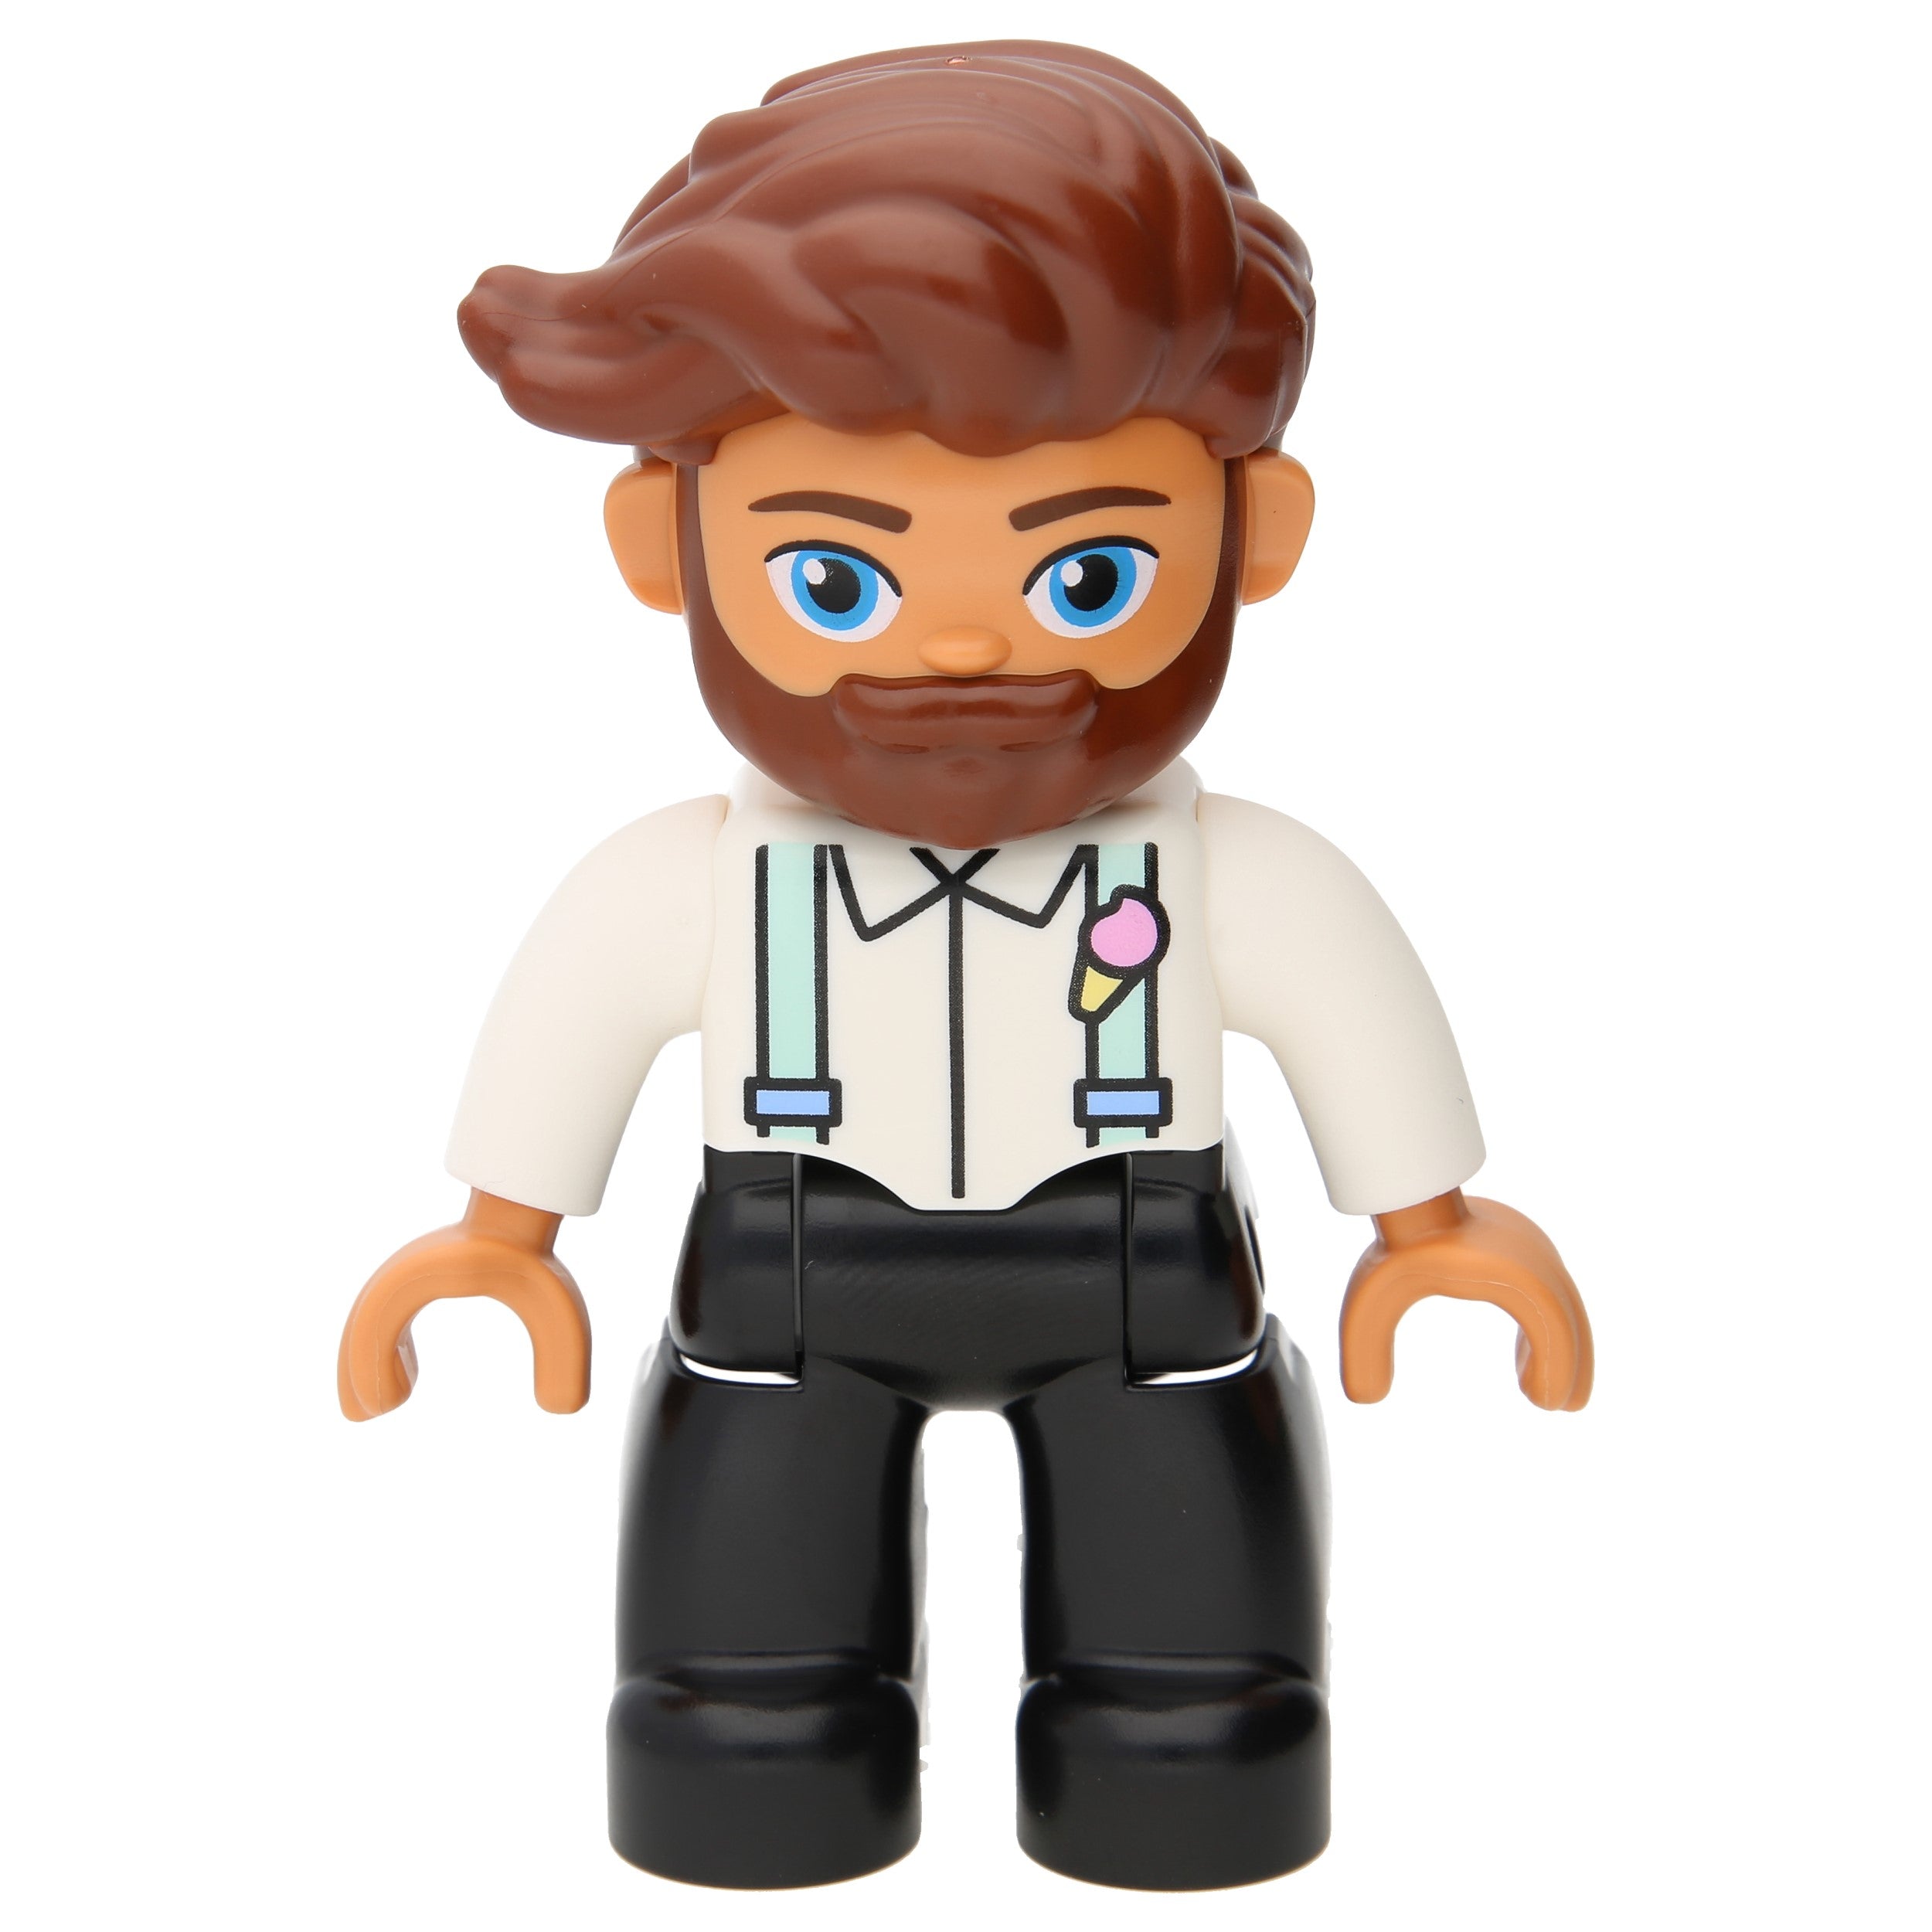 LEGO DUPLO Figures - man with black legs and white top